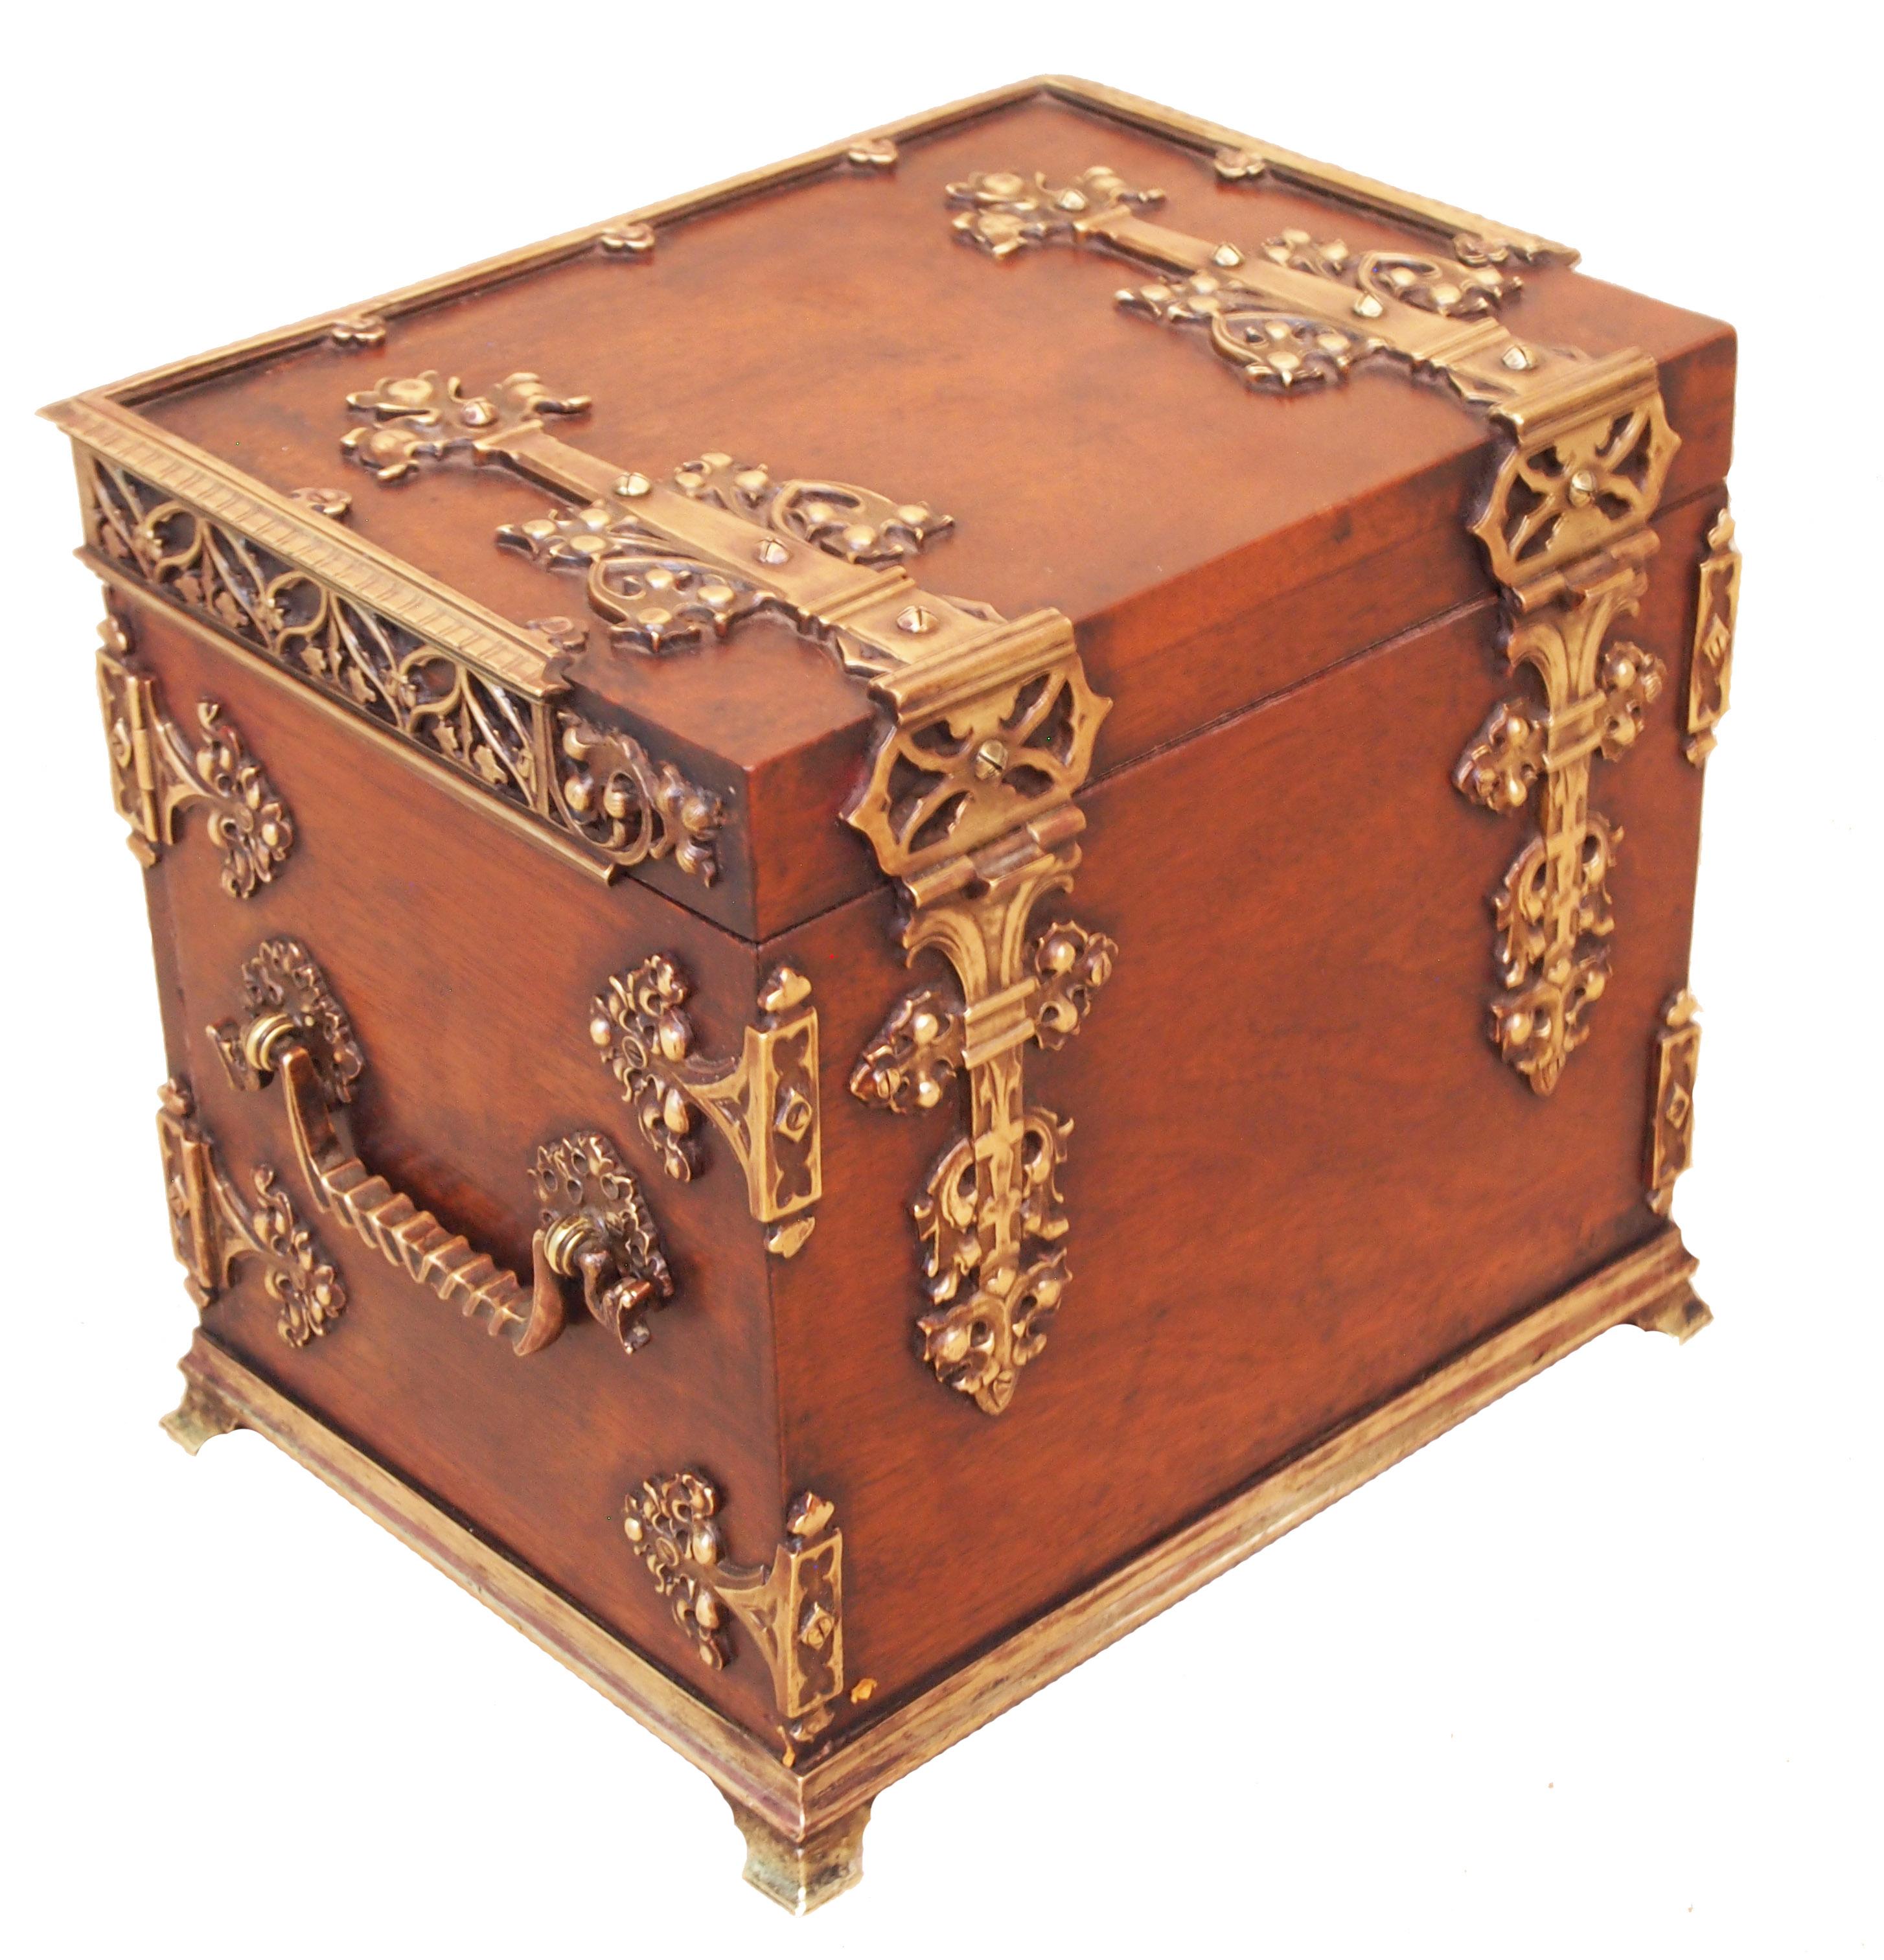 A fine quality mid-19th century walnut cigar humidor box in
the Gothic taste having decorative Ormolu strap work
decoration to lift up lid and pair of doors enclosing cigar
slides raised on later brass ogee feet.